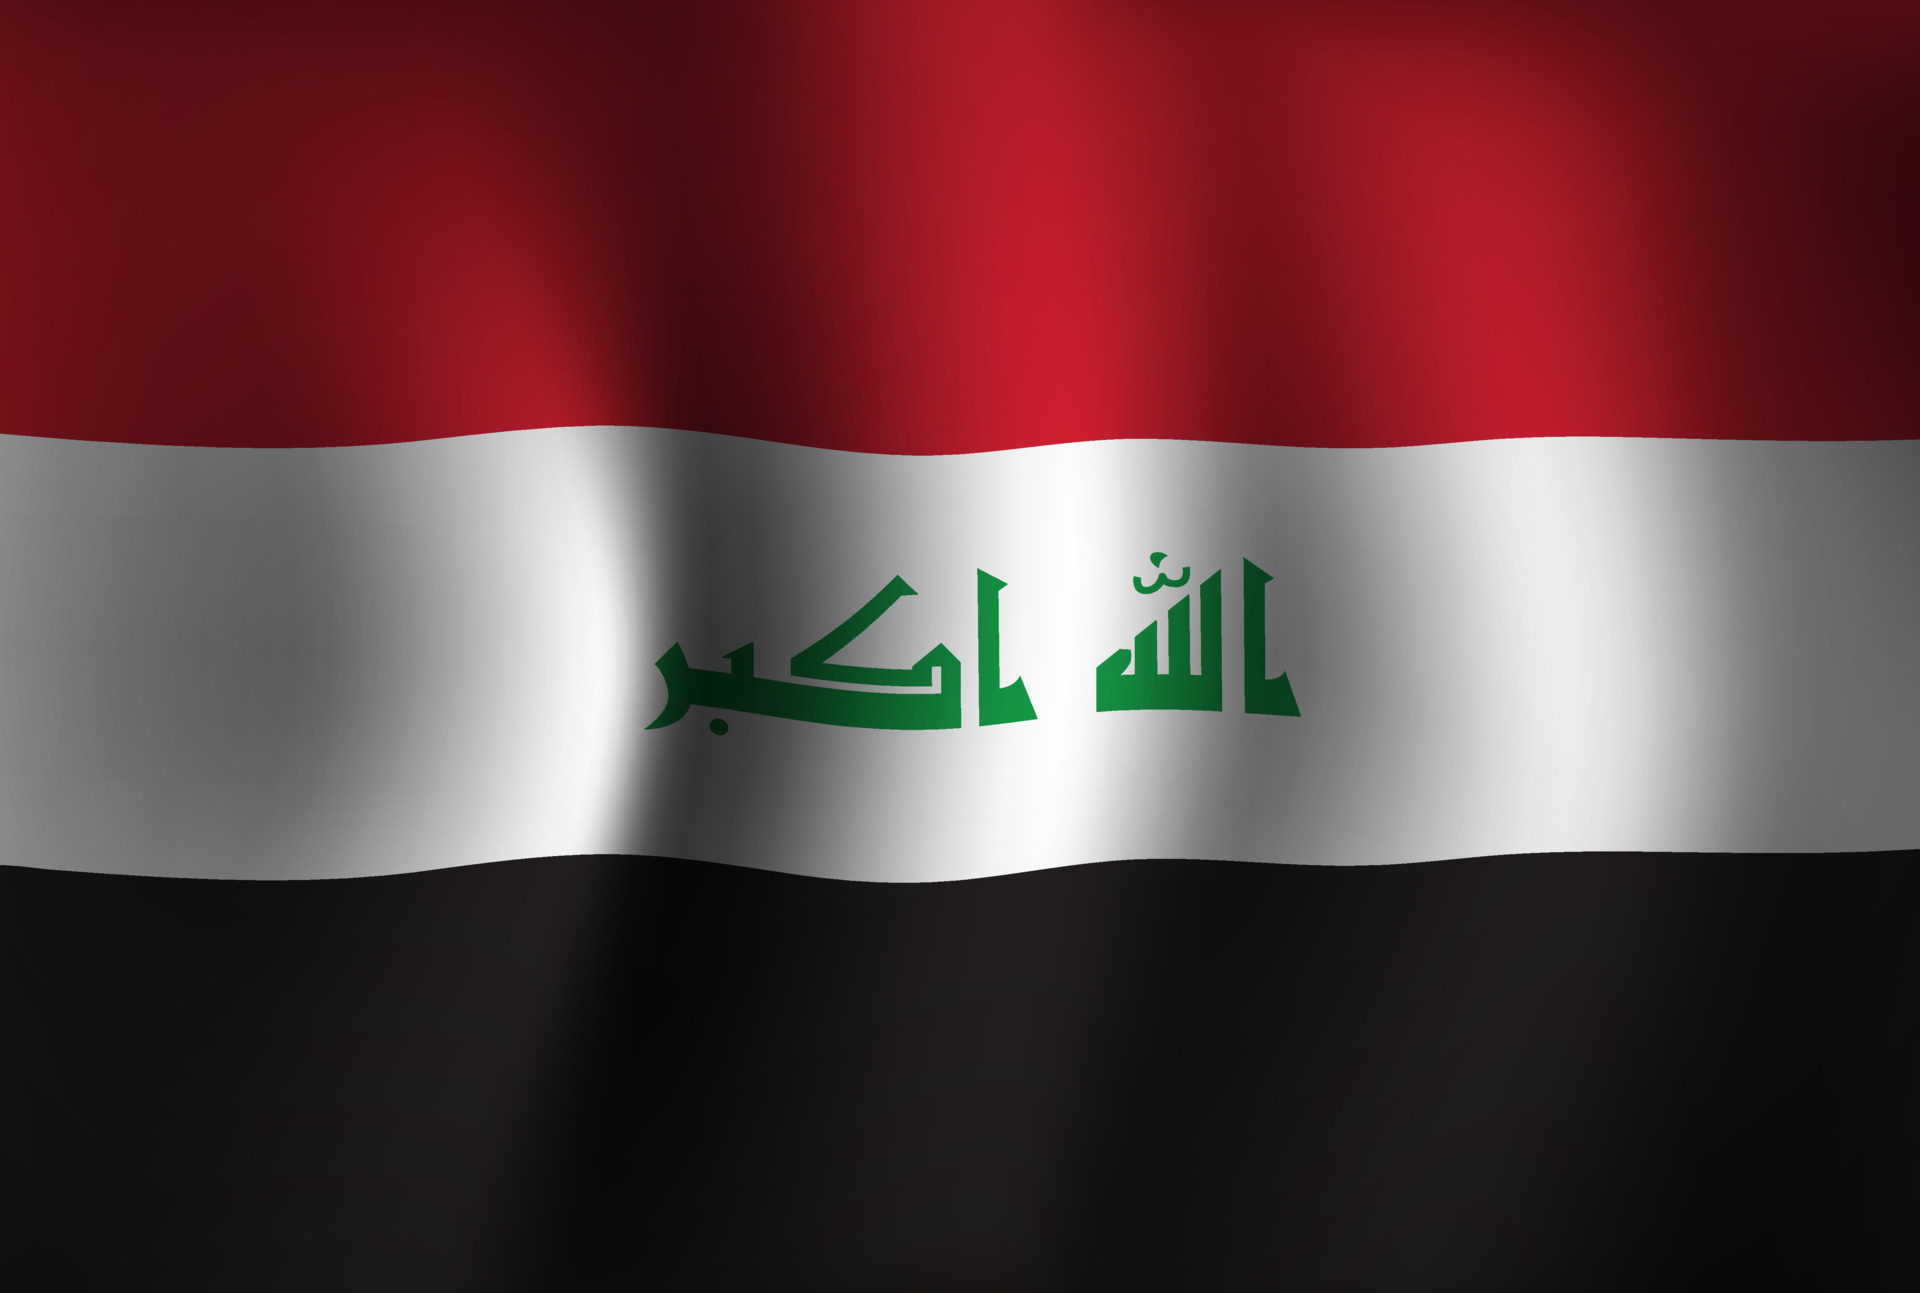 https://static.vecteezy.com/system/resources/previews/004/999/225/original/iraq-flag-background-waving-3d-national-independence-day-banner-wallpaper-vector.jpg